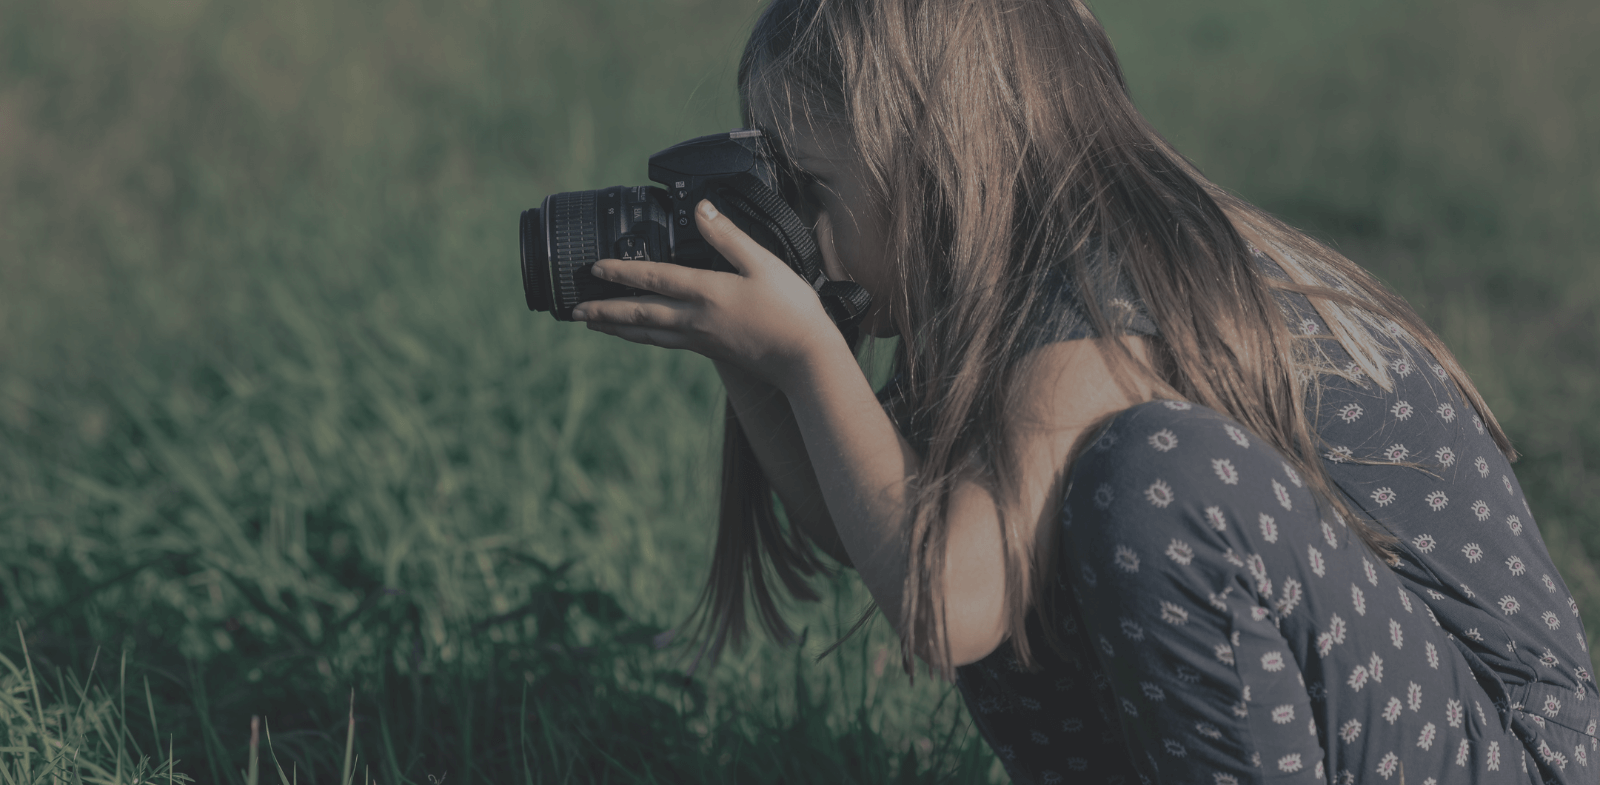 young girl holding DSLR camera in green grass field